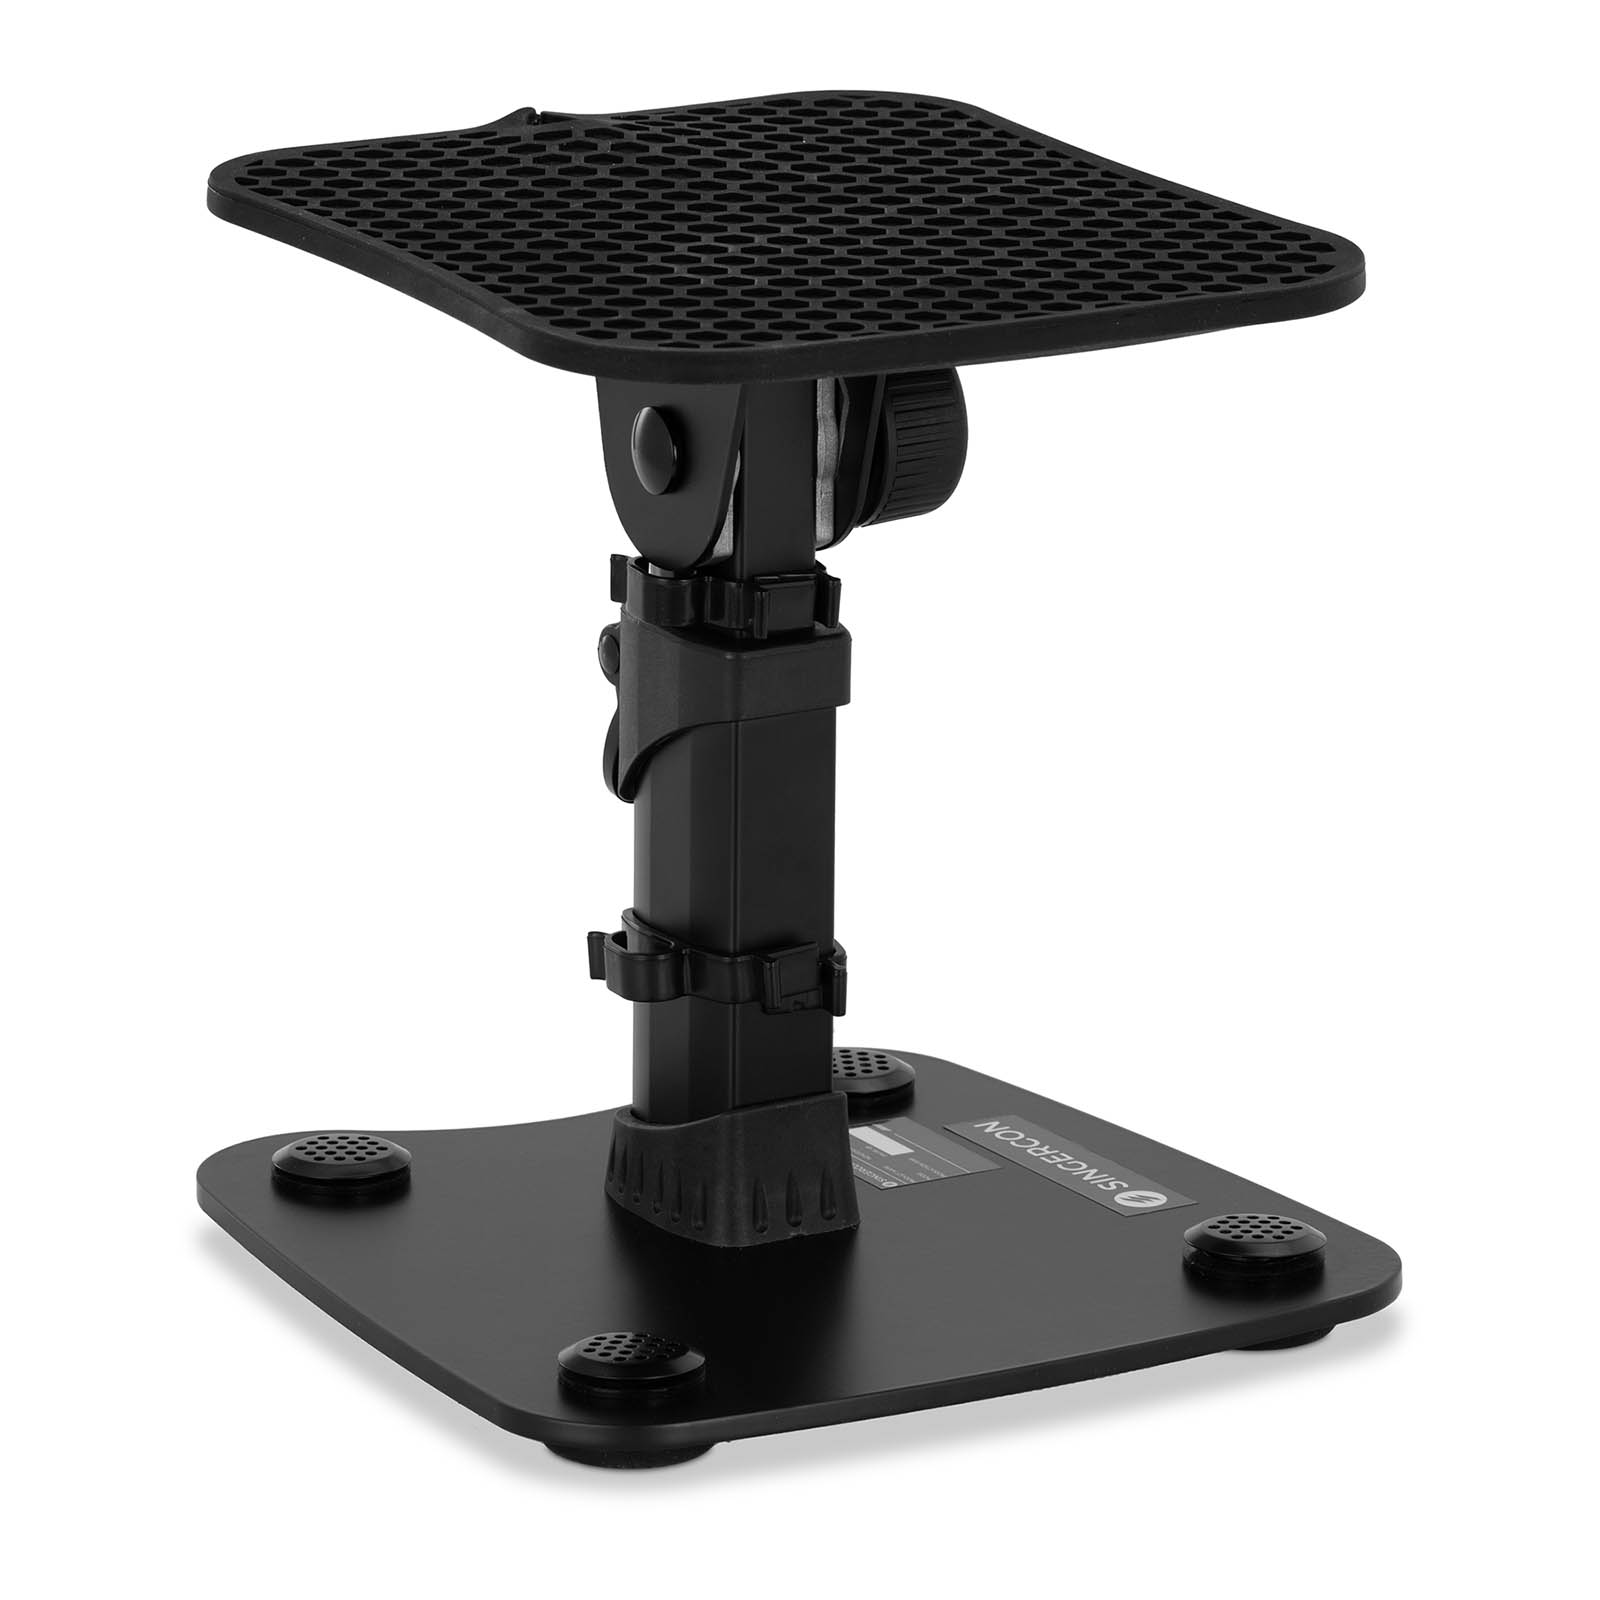 Laptop and Monitor Holder - height adjustable - tiltable